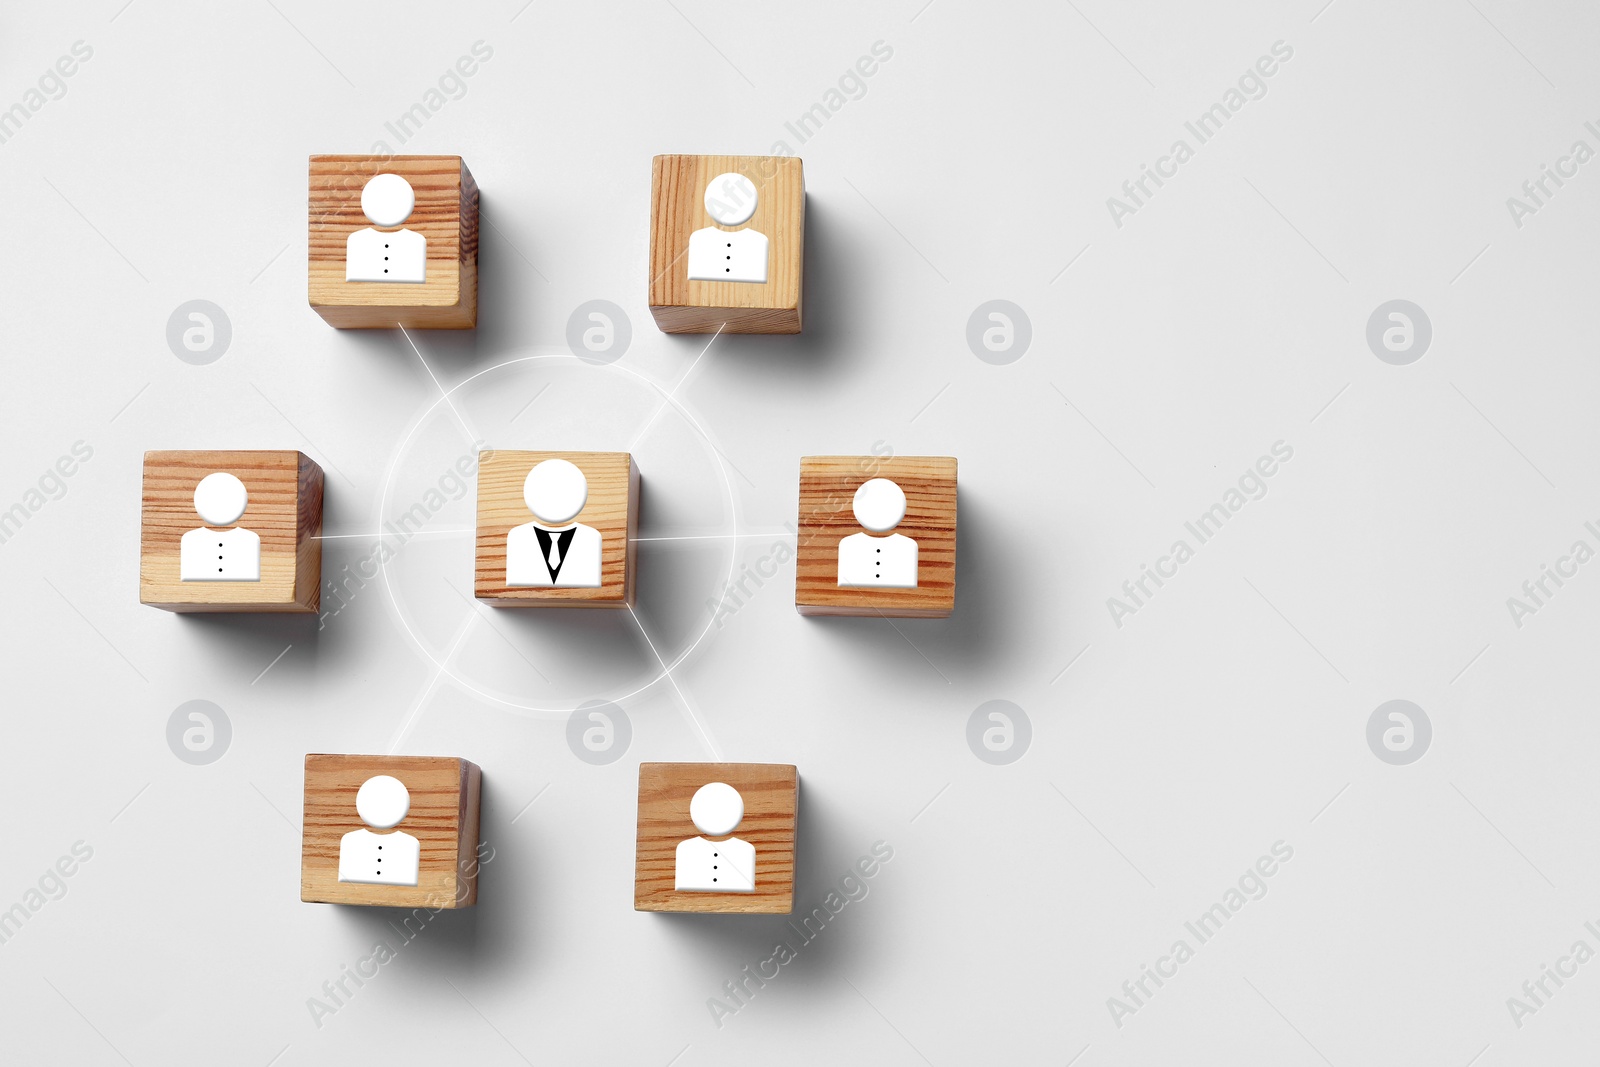 Image of Team management. Wooden cubes with human icons linked together symbolizing company structure on white background table, top view. Space for text